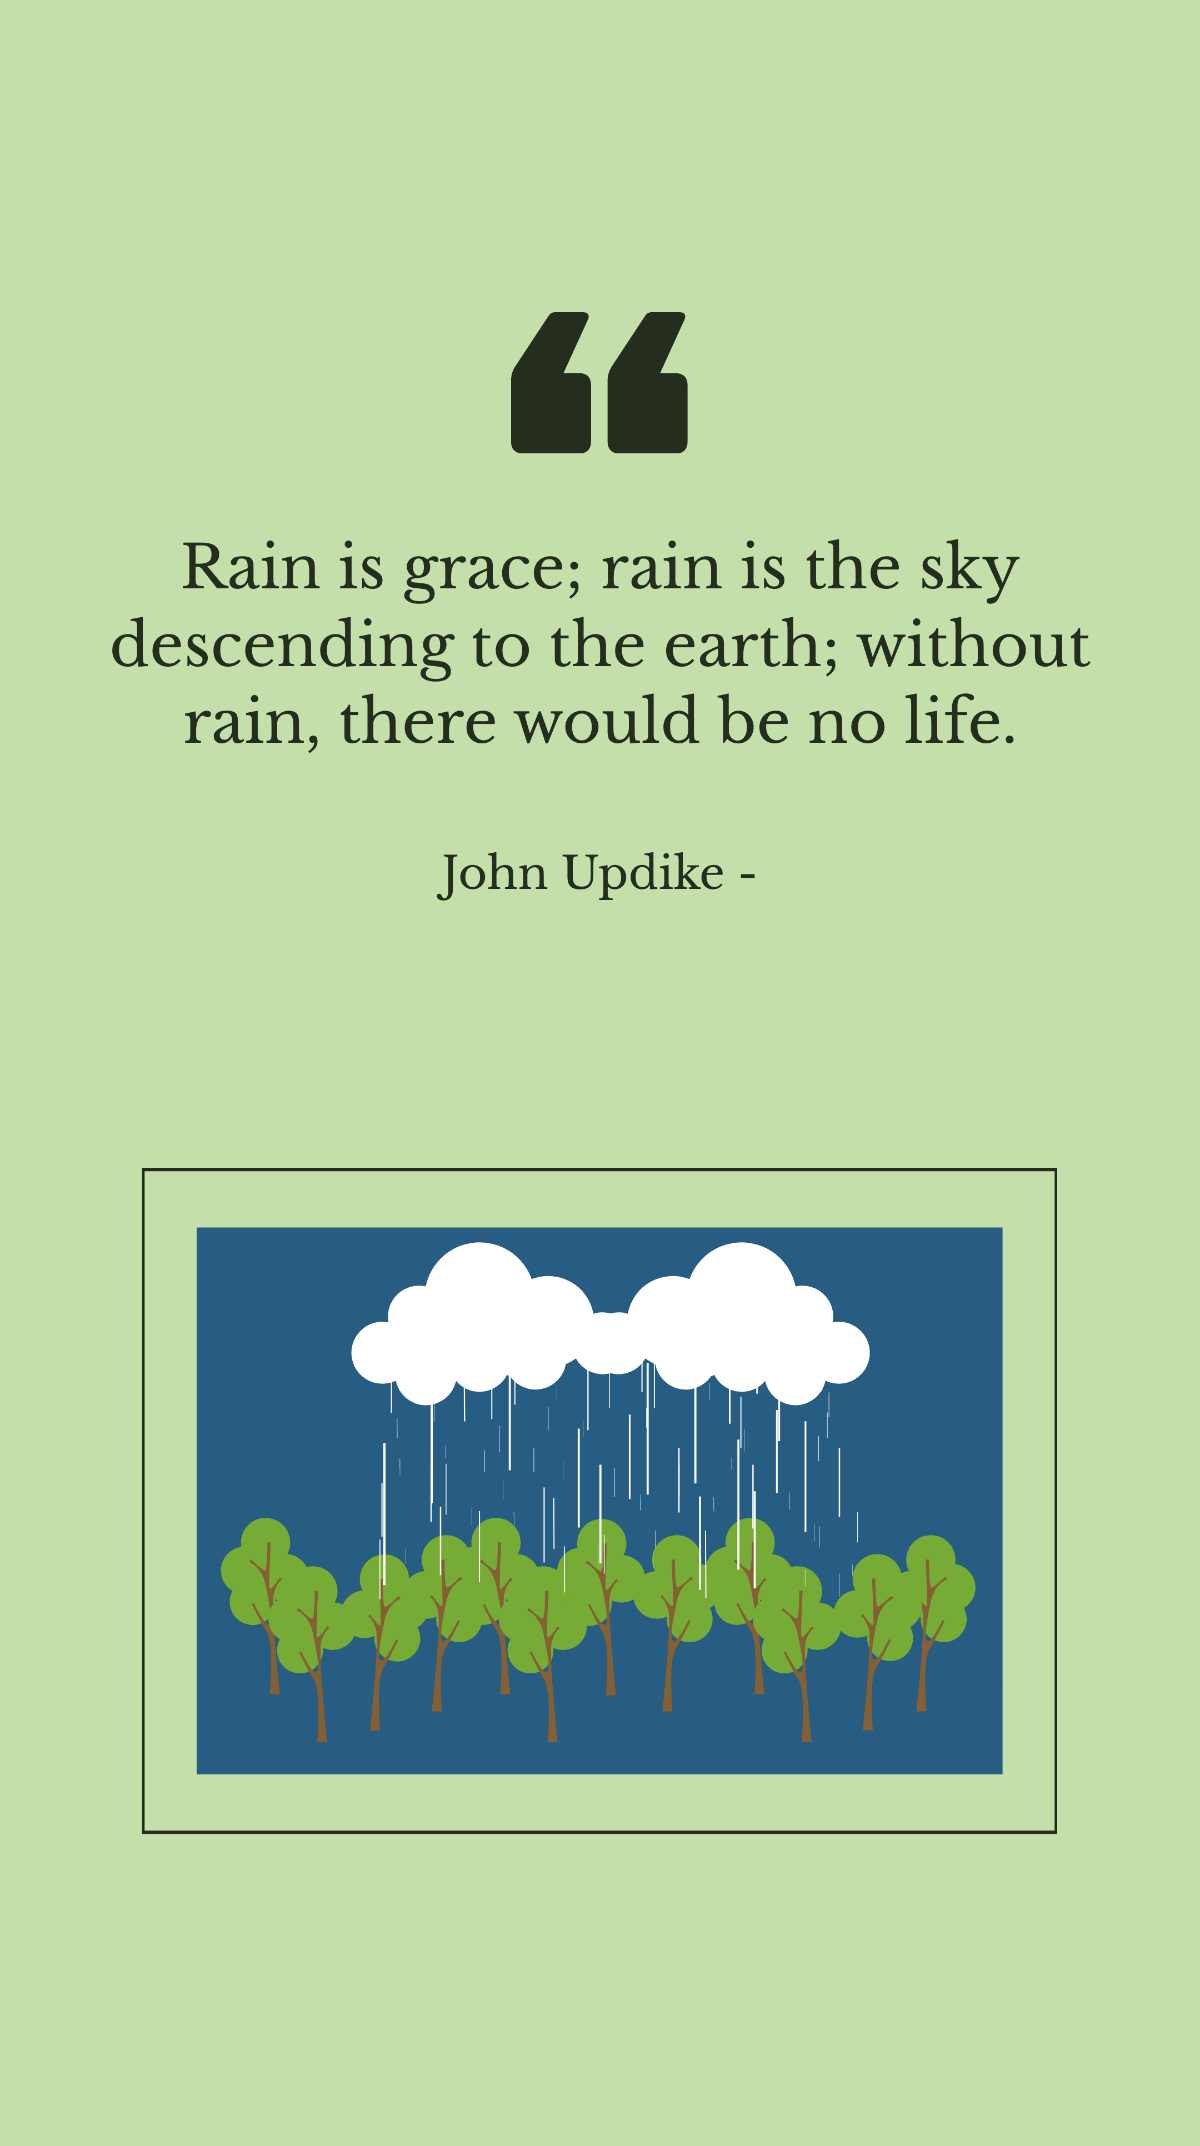 John Updike - Rain is grace; rain is the sky descending to the earth; without rain, there would be no life. Template